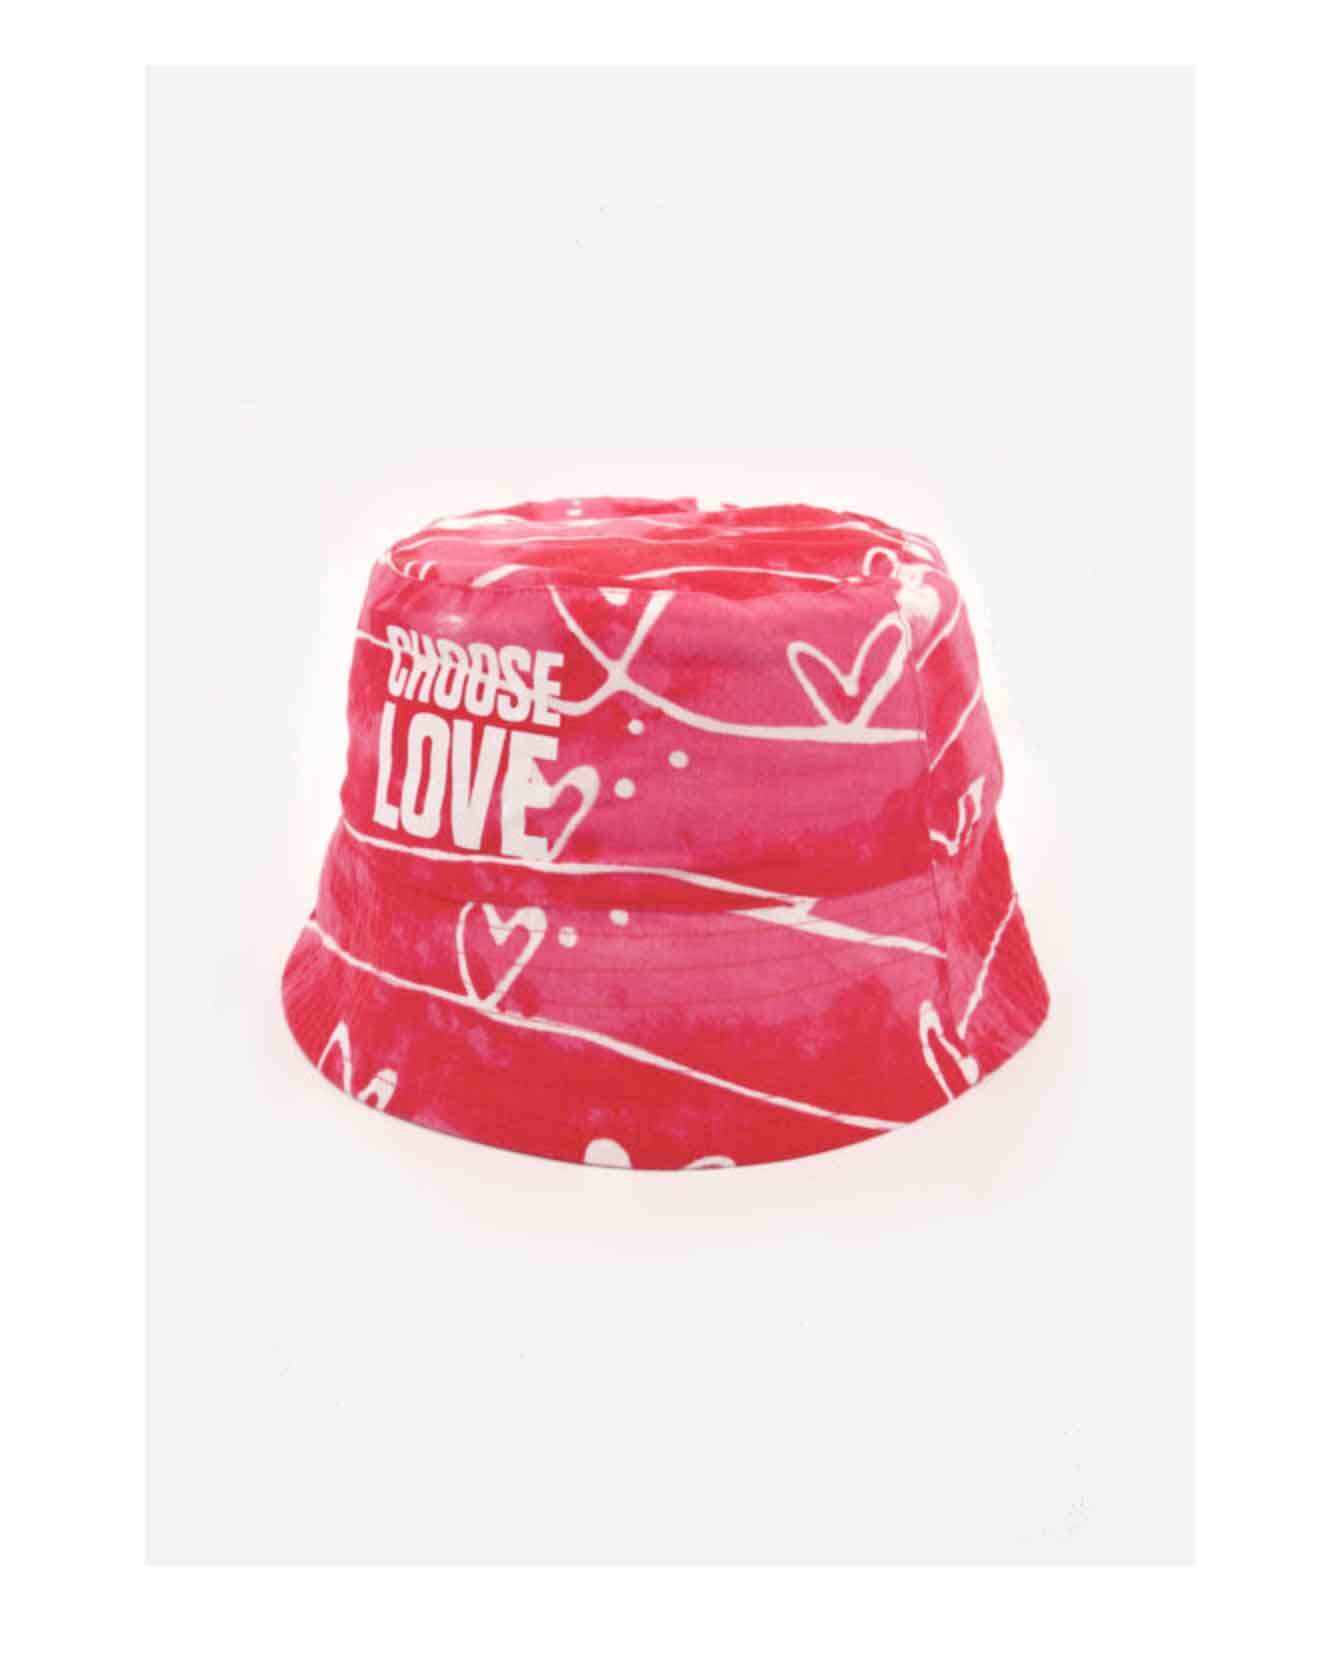 Illustrated patterned pink bucket hat as part of a range of merchandise for CHOOSE LOVE charity in collaboration with TK Maxx and Print Club London. Repeat pattern of linear love hearts with a watercolour gradient ink background. Pink ink background.